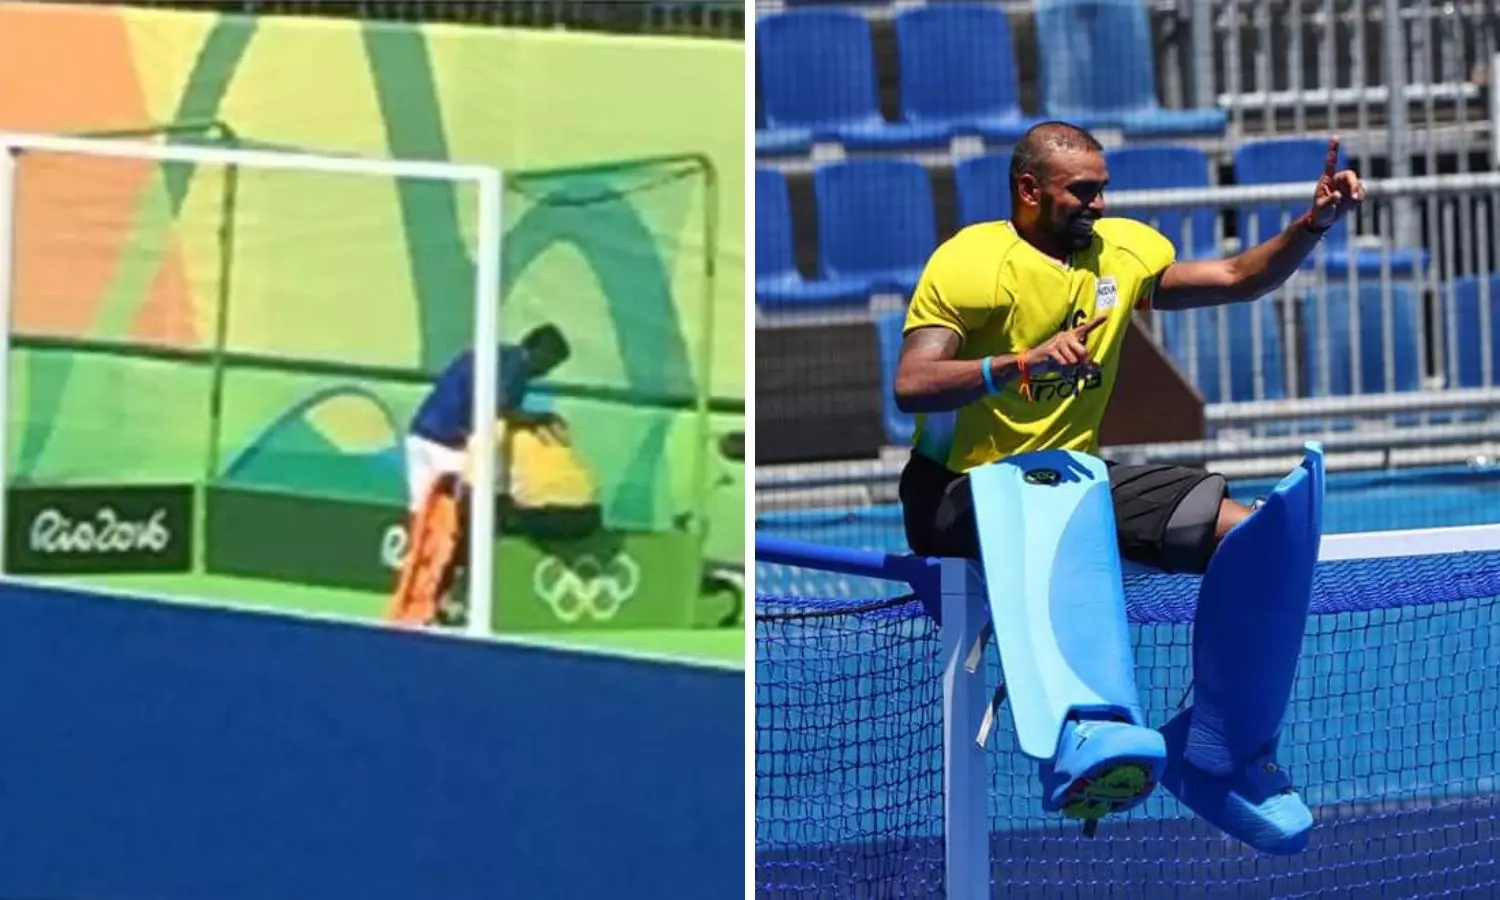 A tale of two pictures- Sreejesh crying inside goal post after 2016 Olympcis (left) and Sreejesh after winning bronze medal at Tokyo Olympics.